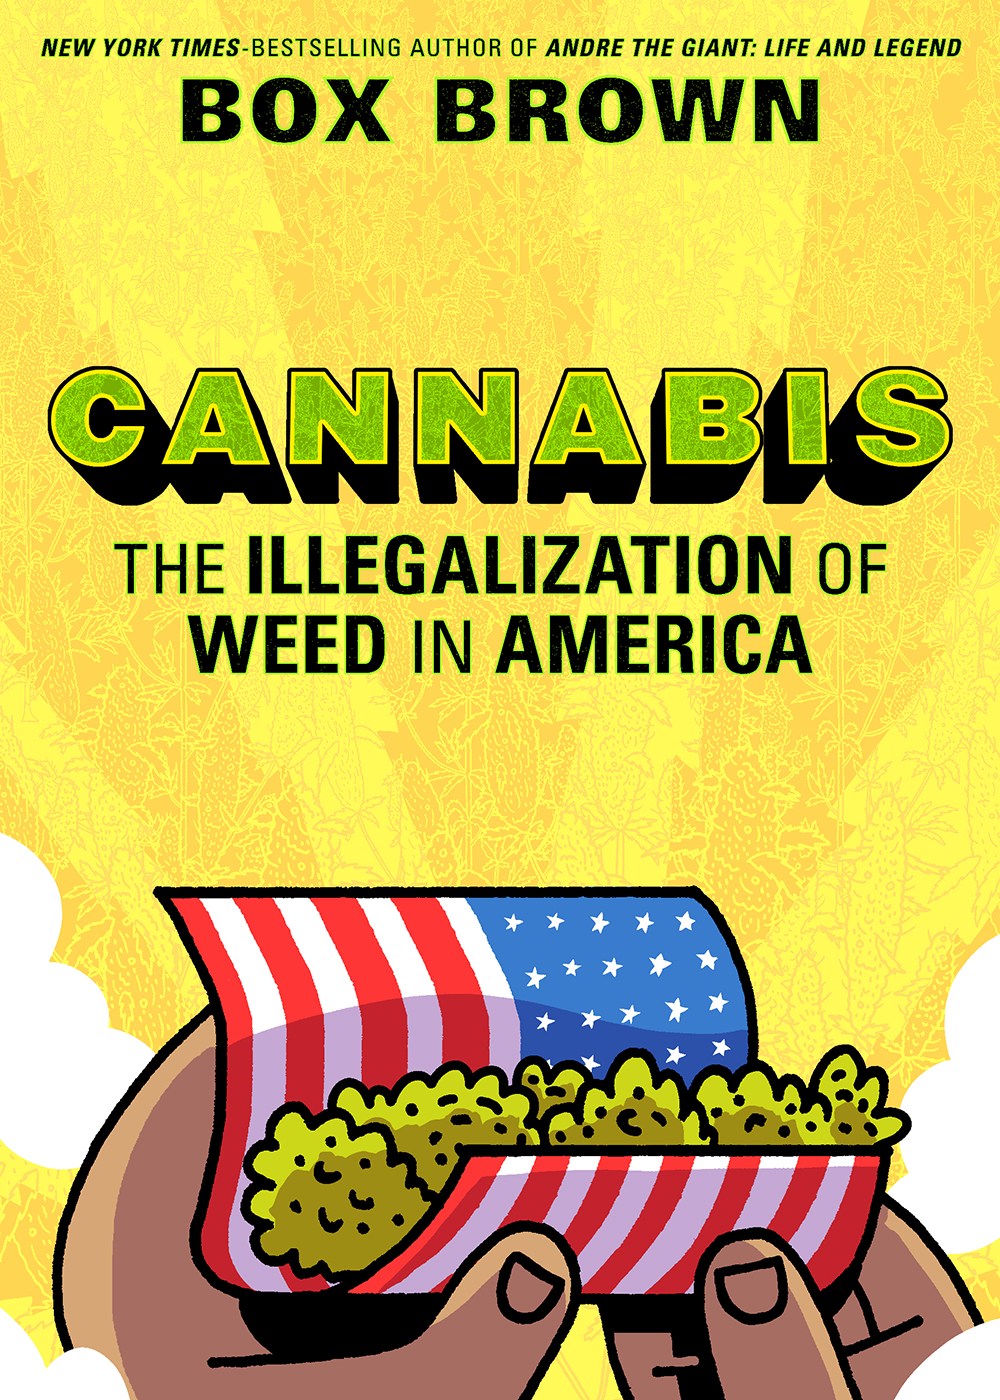 New Graphic Novel Dives into the History Behind Cannabis Prohibition